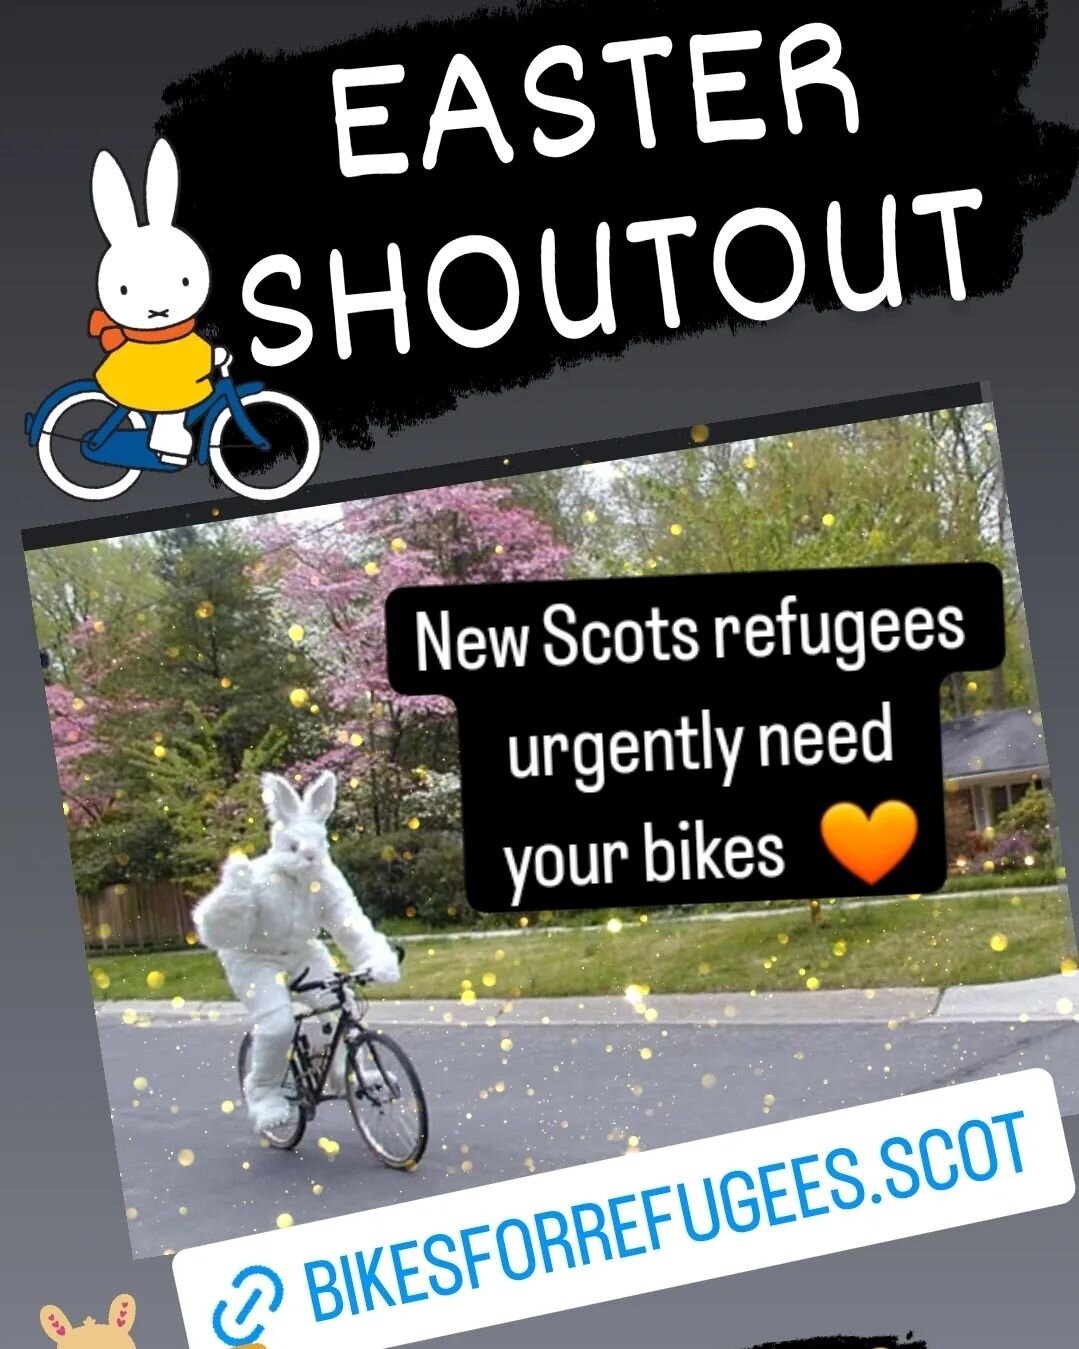 www.bikesforrefugees.scot 

If you have a bike that you can donate to a refugee we would love to hear from you.

Better condition the bike the better. Adult bikes particularly welcome.

Please complete our donate a bike for on our website thank you ?